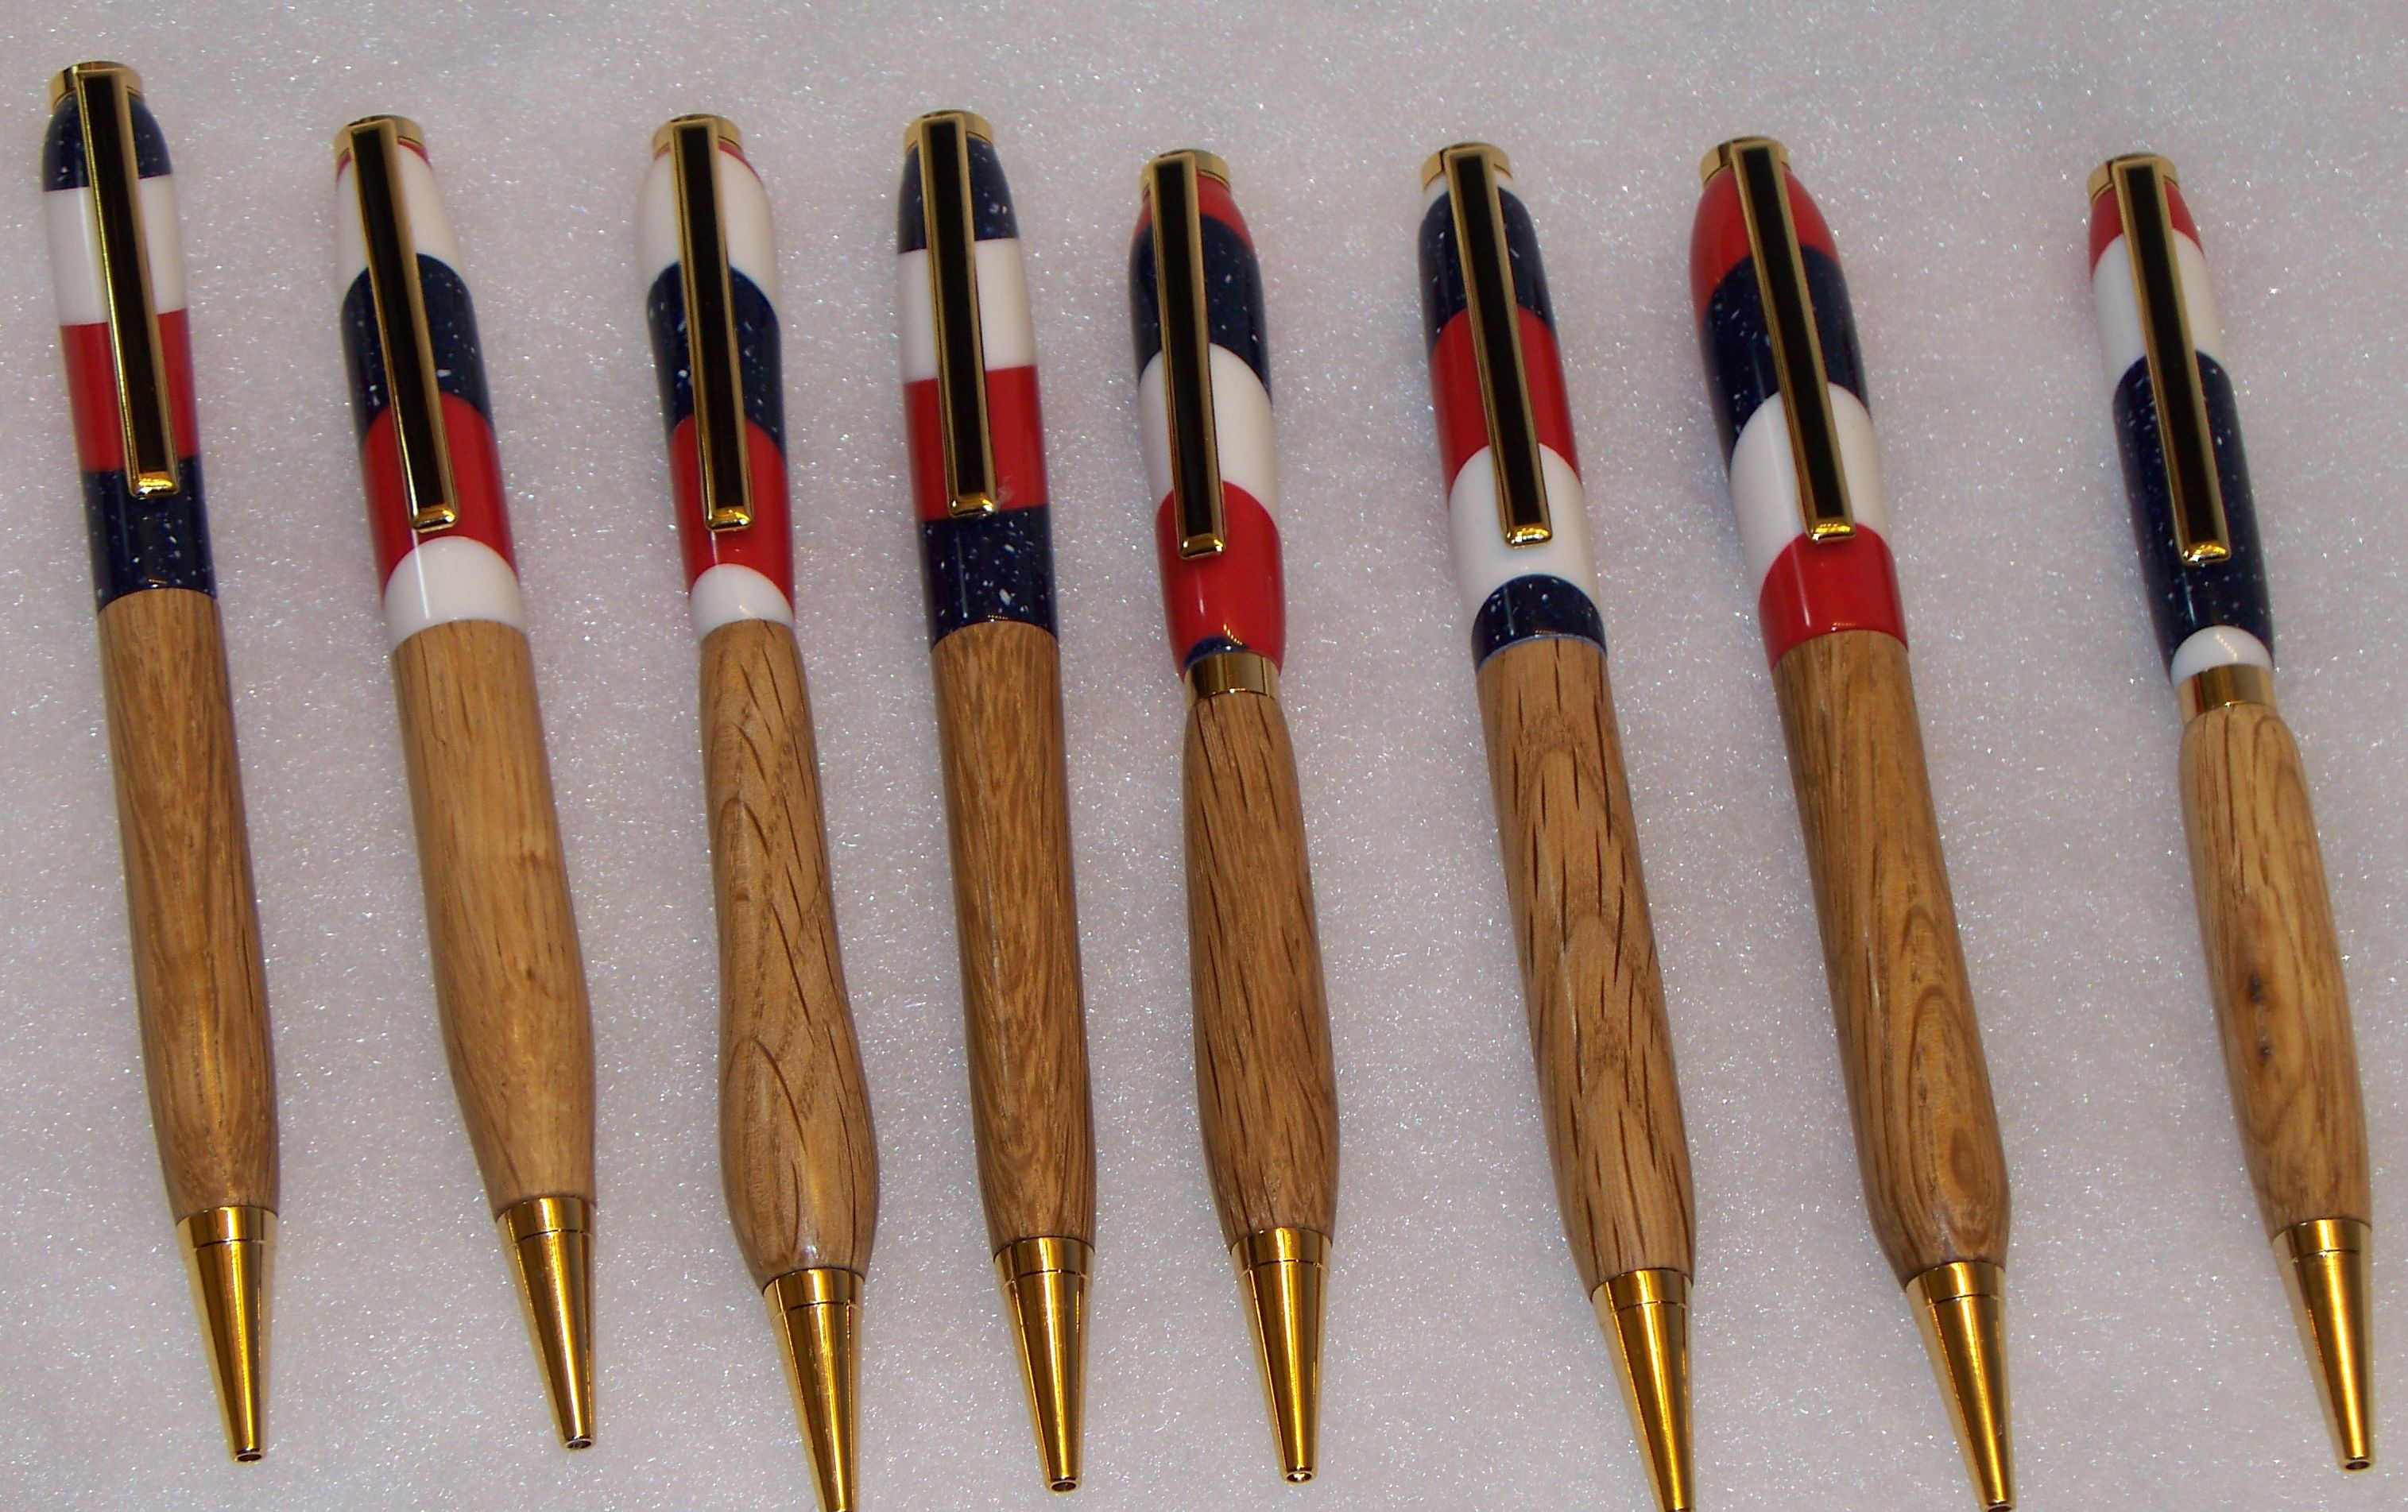  Pen Turning Pictures troops11.jpg for Turning Round 